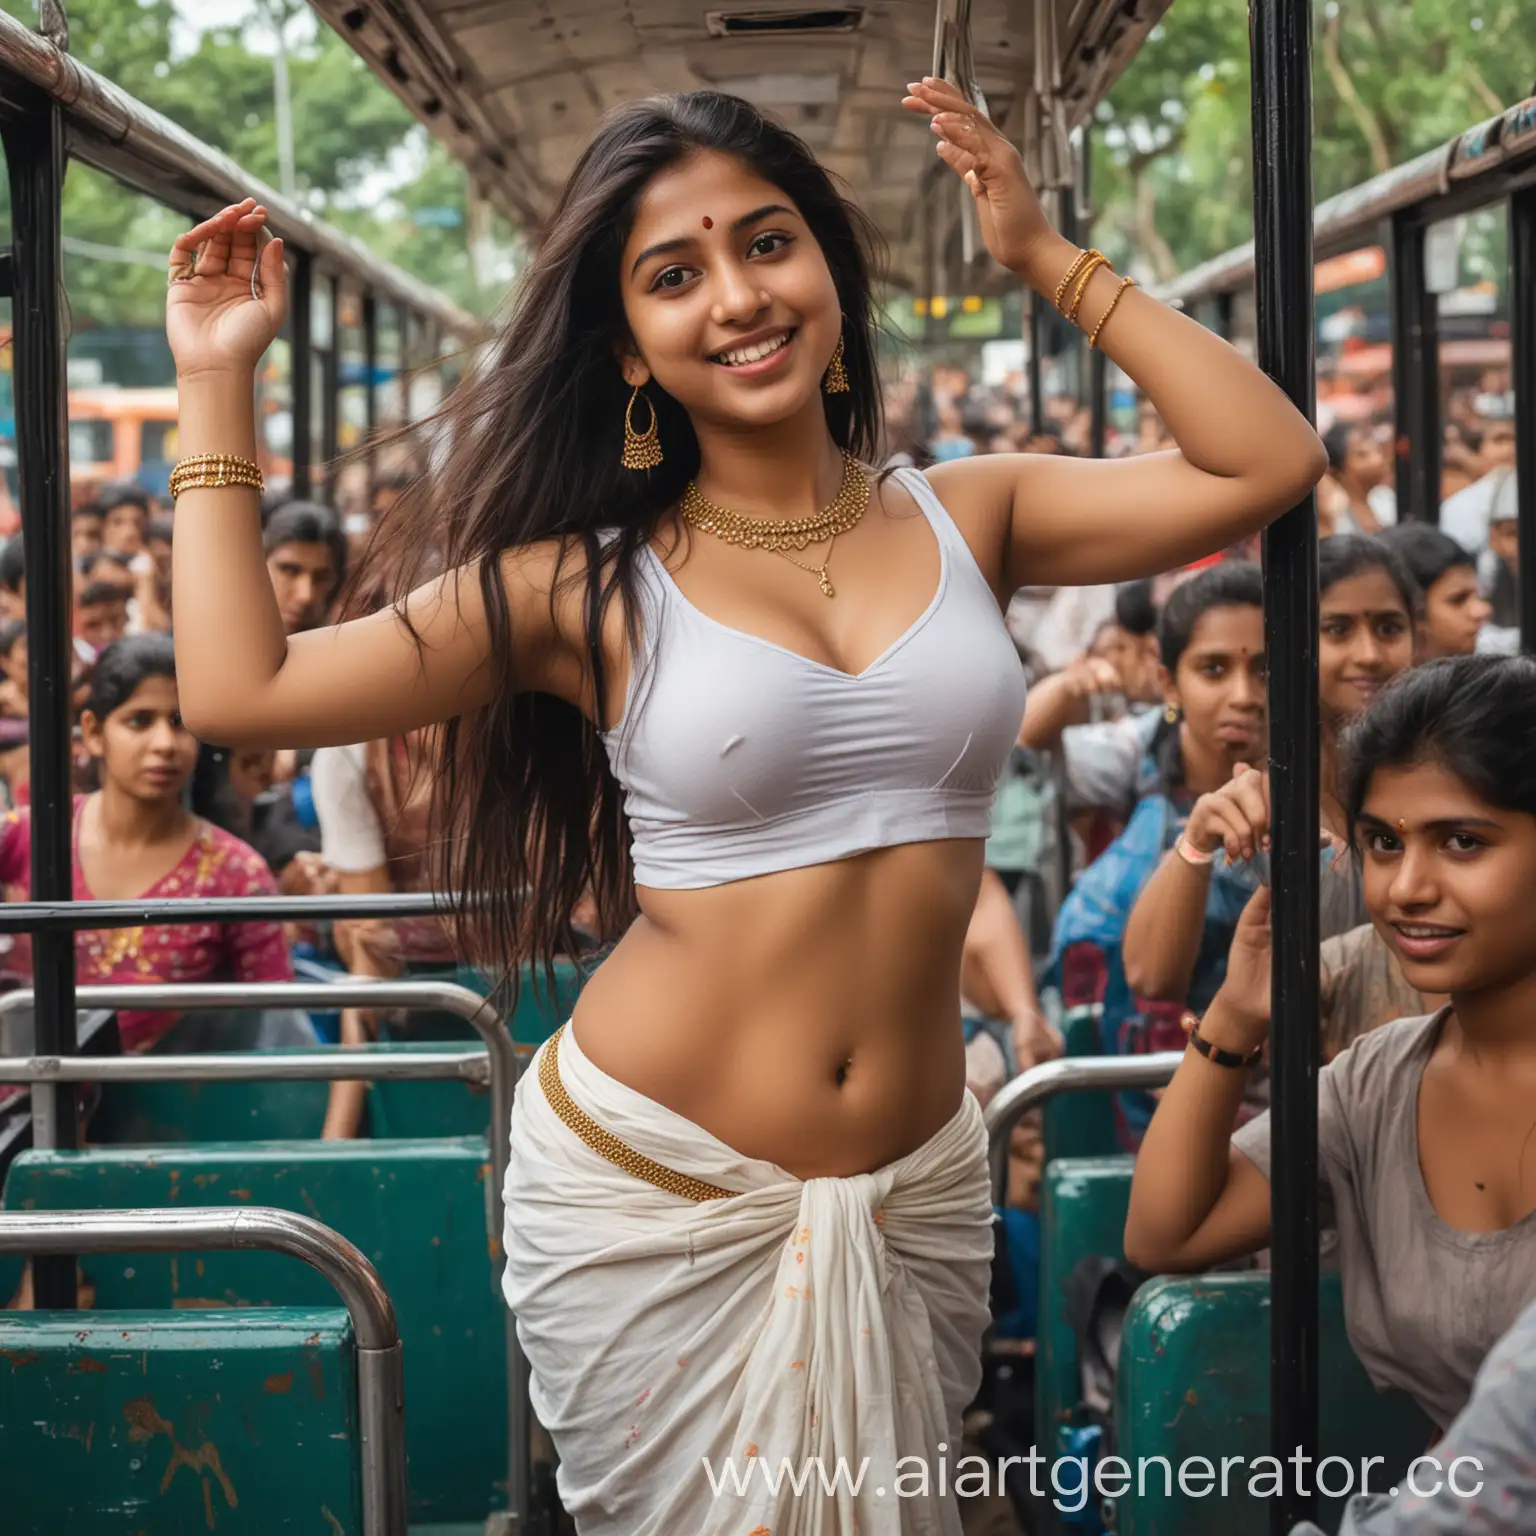 Confident-Indian-Girl-on-Crowded-Bus-Modest-Attire-and-Resilient-Smile